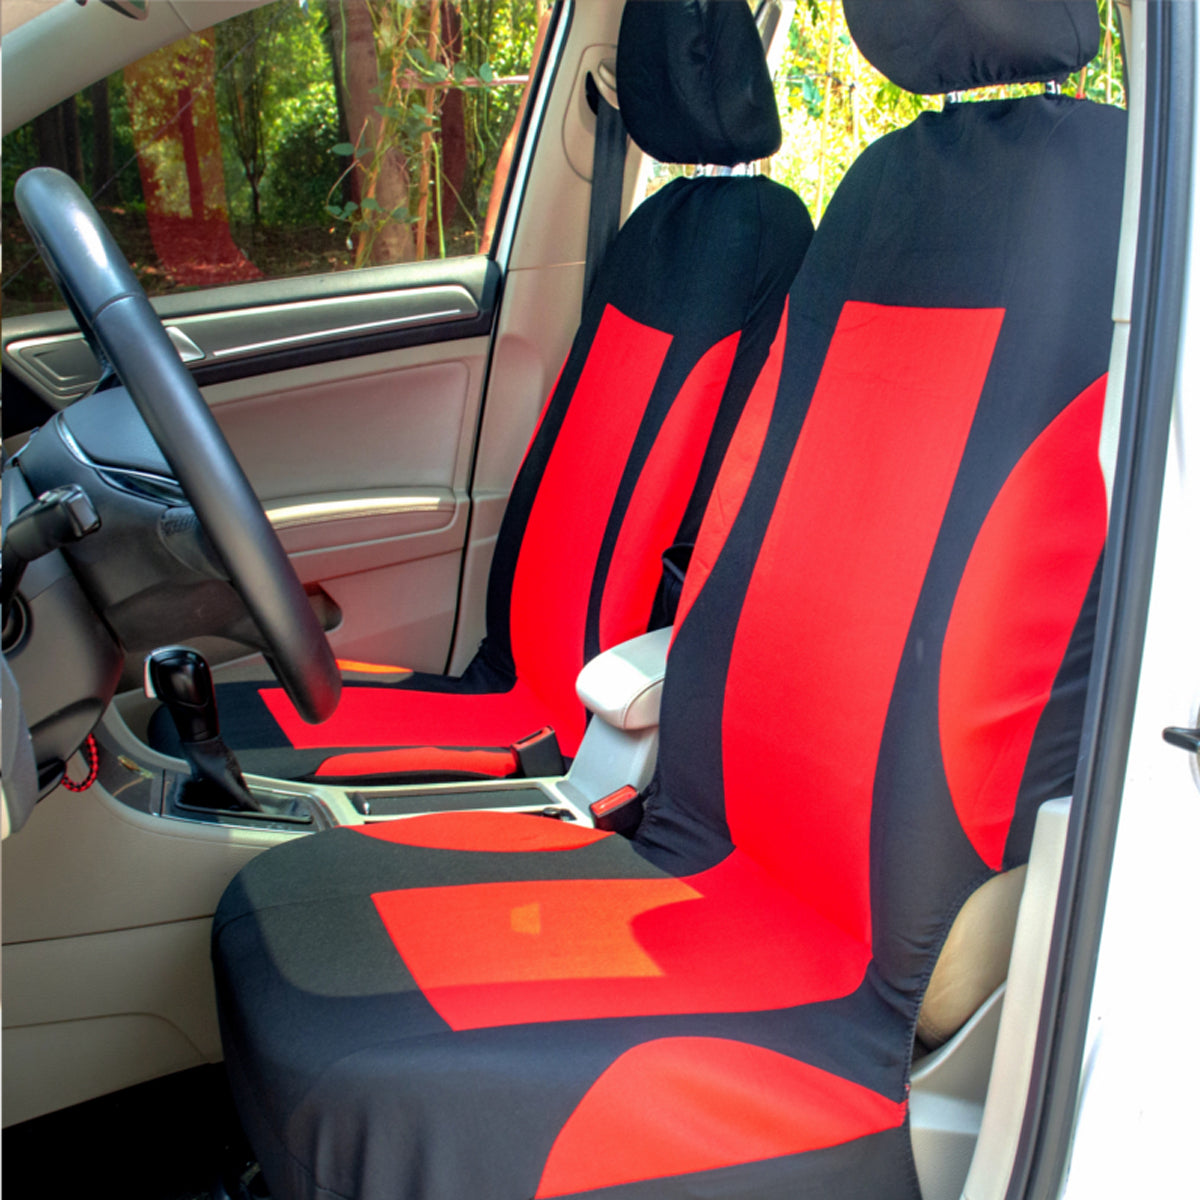 Front Car Auto Seat Cushion Cover Protective Seat Headrest Covers Universal - Auto GoShop